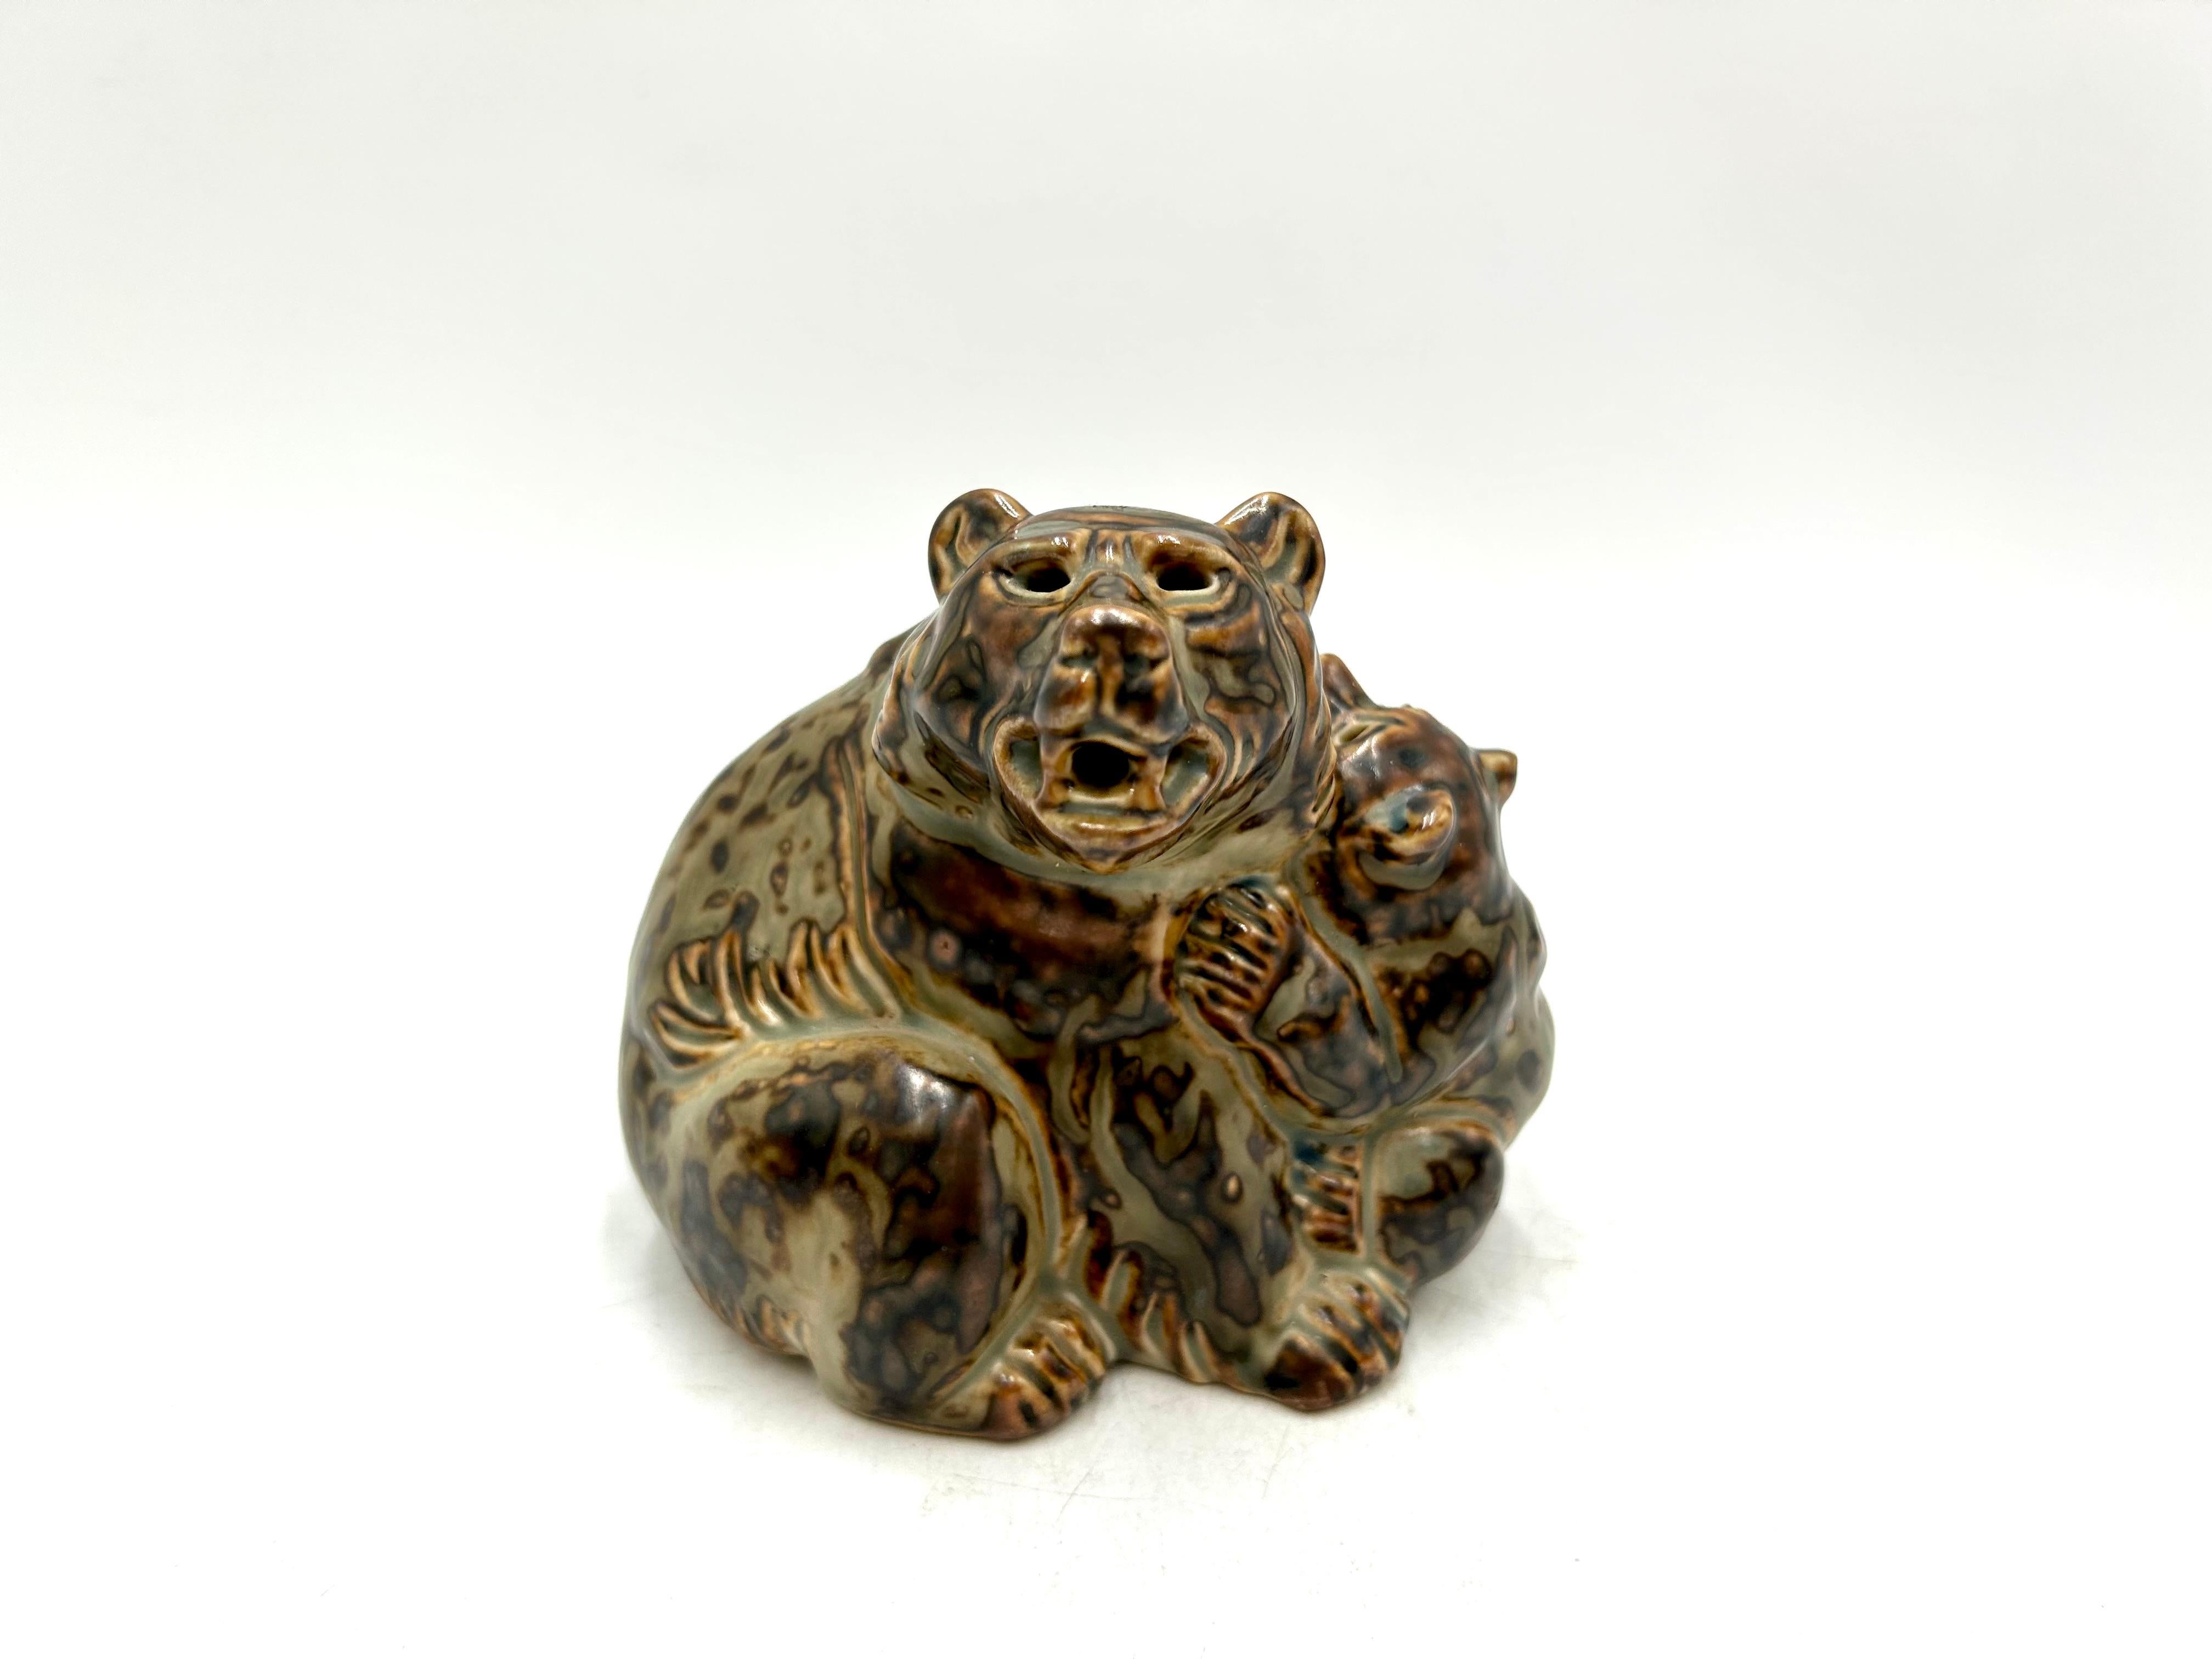 Porcelain figurine of a bear with cub, designed by Knud Kyhn for Royal Copenhagen.

Produced in 1960. Very good condition, no damage.

Measures: height 11cm, width 11cm, depth 8cm.